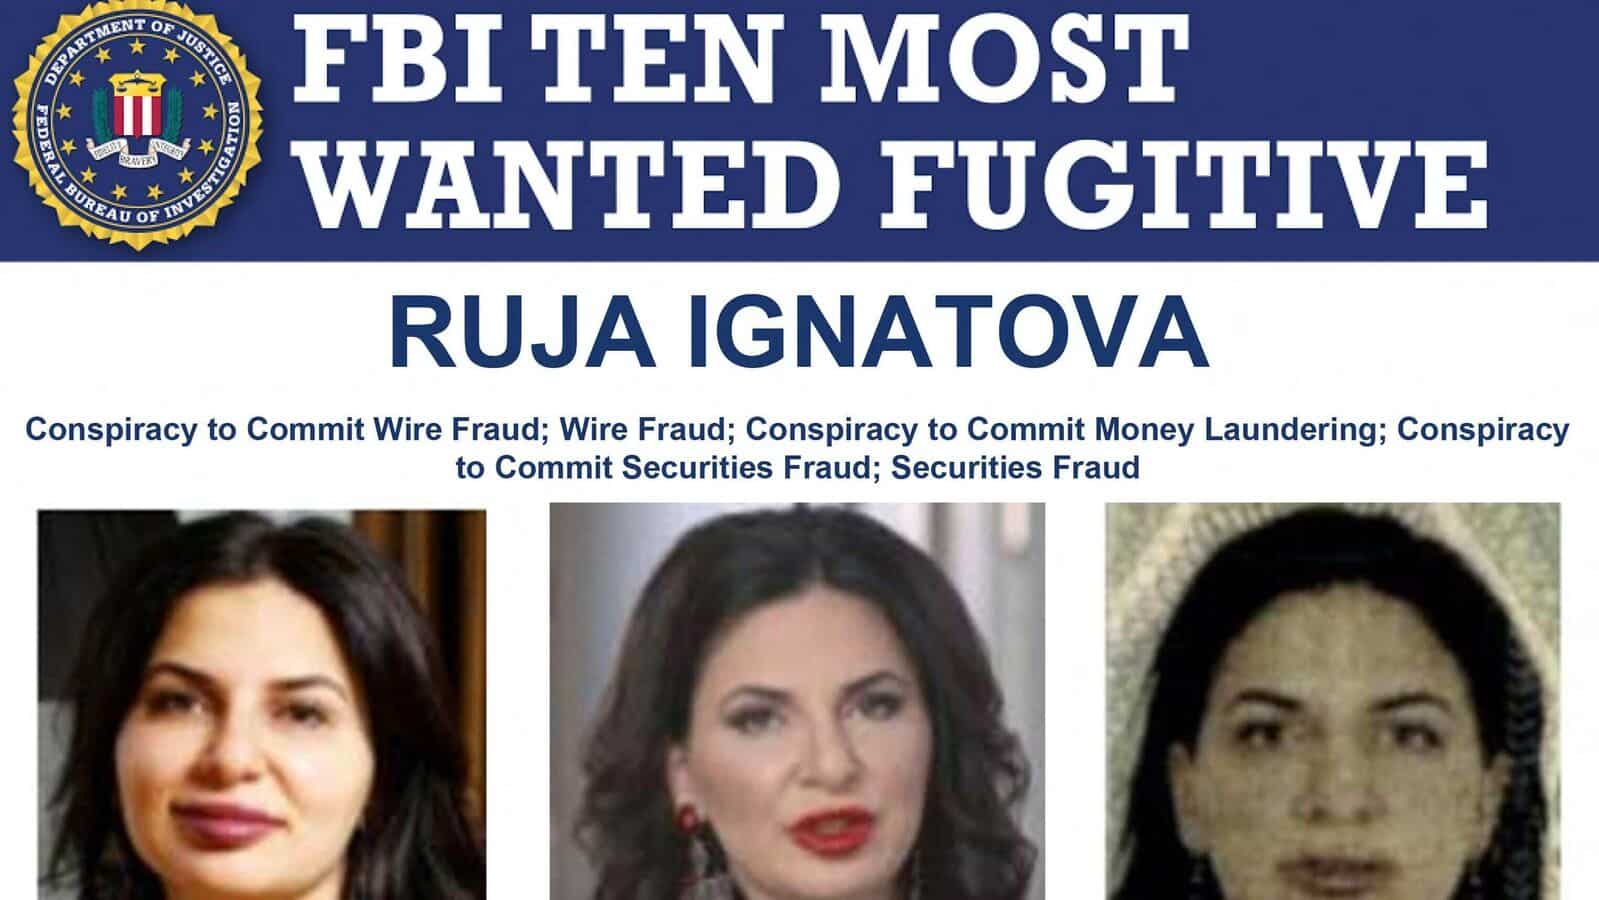 Ruja Ignatova is now one of the FBI's most wanted criminals.